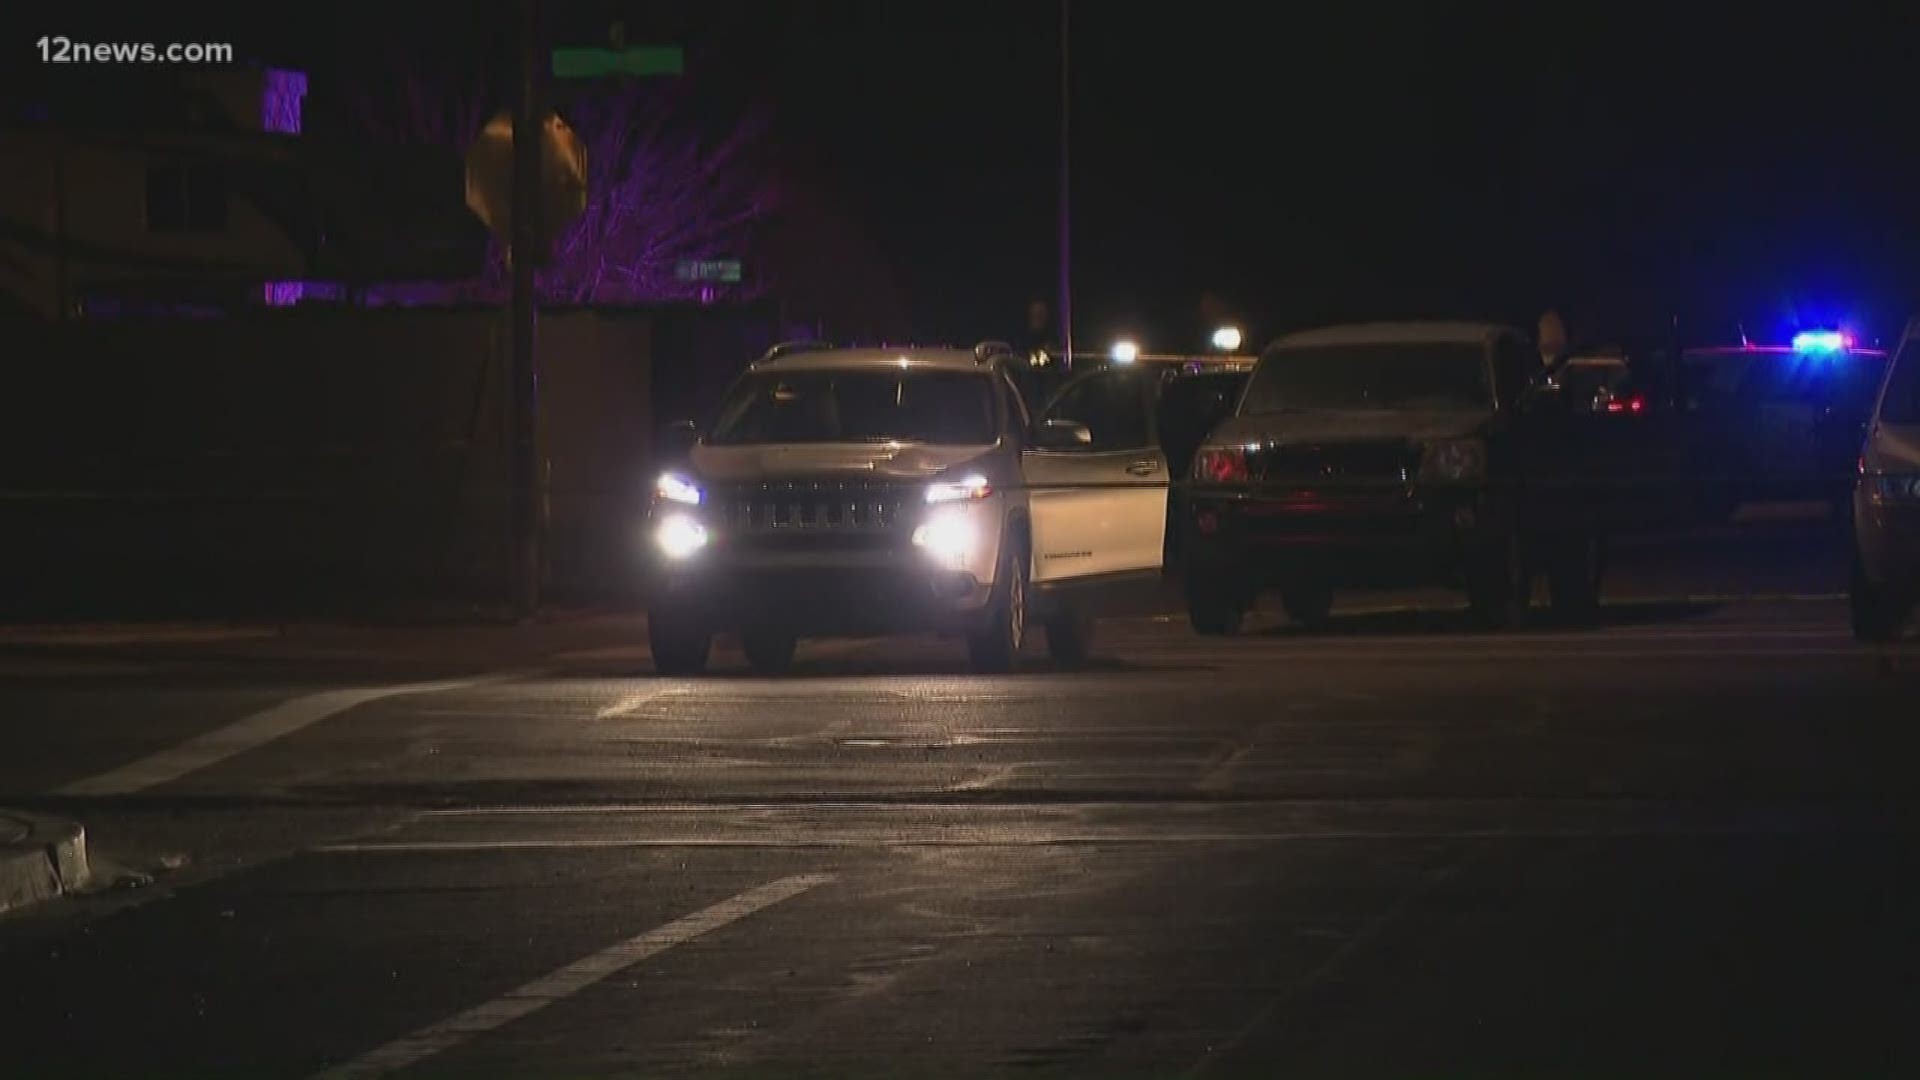 The Arizona Department of Public Safety is looking for two suspects after a traffic stop led to a trooper-involved shooting in Glendale Thursday evening.